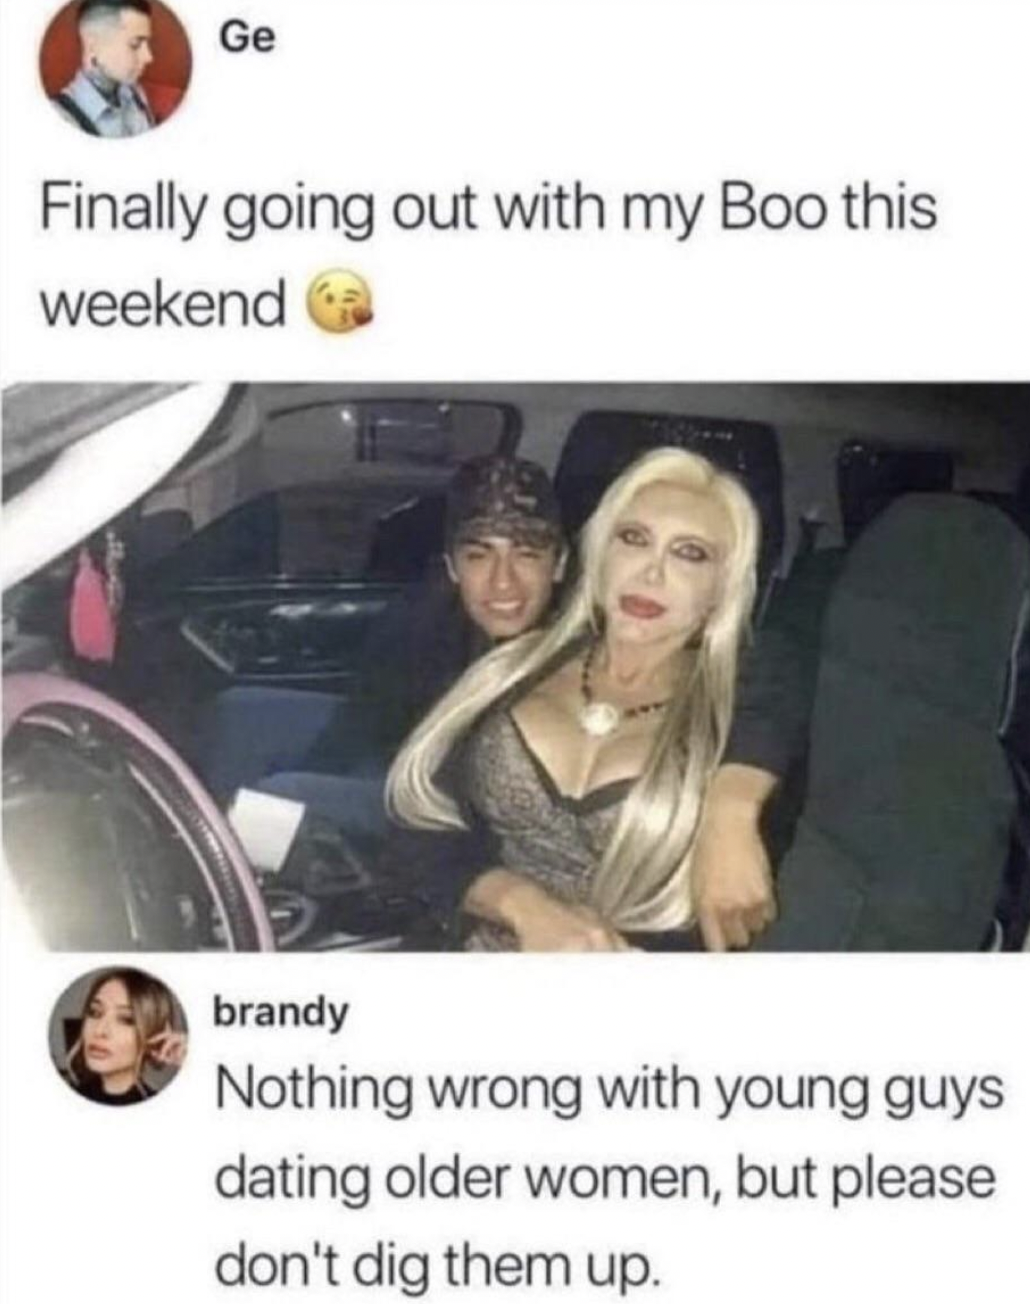 Face-Plants and Fails - memes about dating older woman - Ge Finally going out with my Boo this weekend brandy Nothing wrong with young guys dating older women, but please don't dig them up.